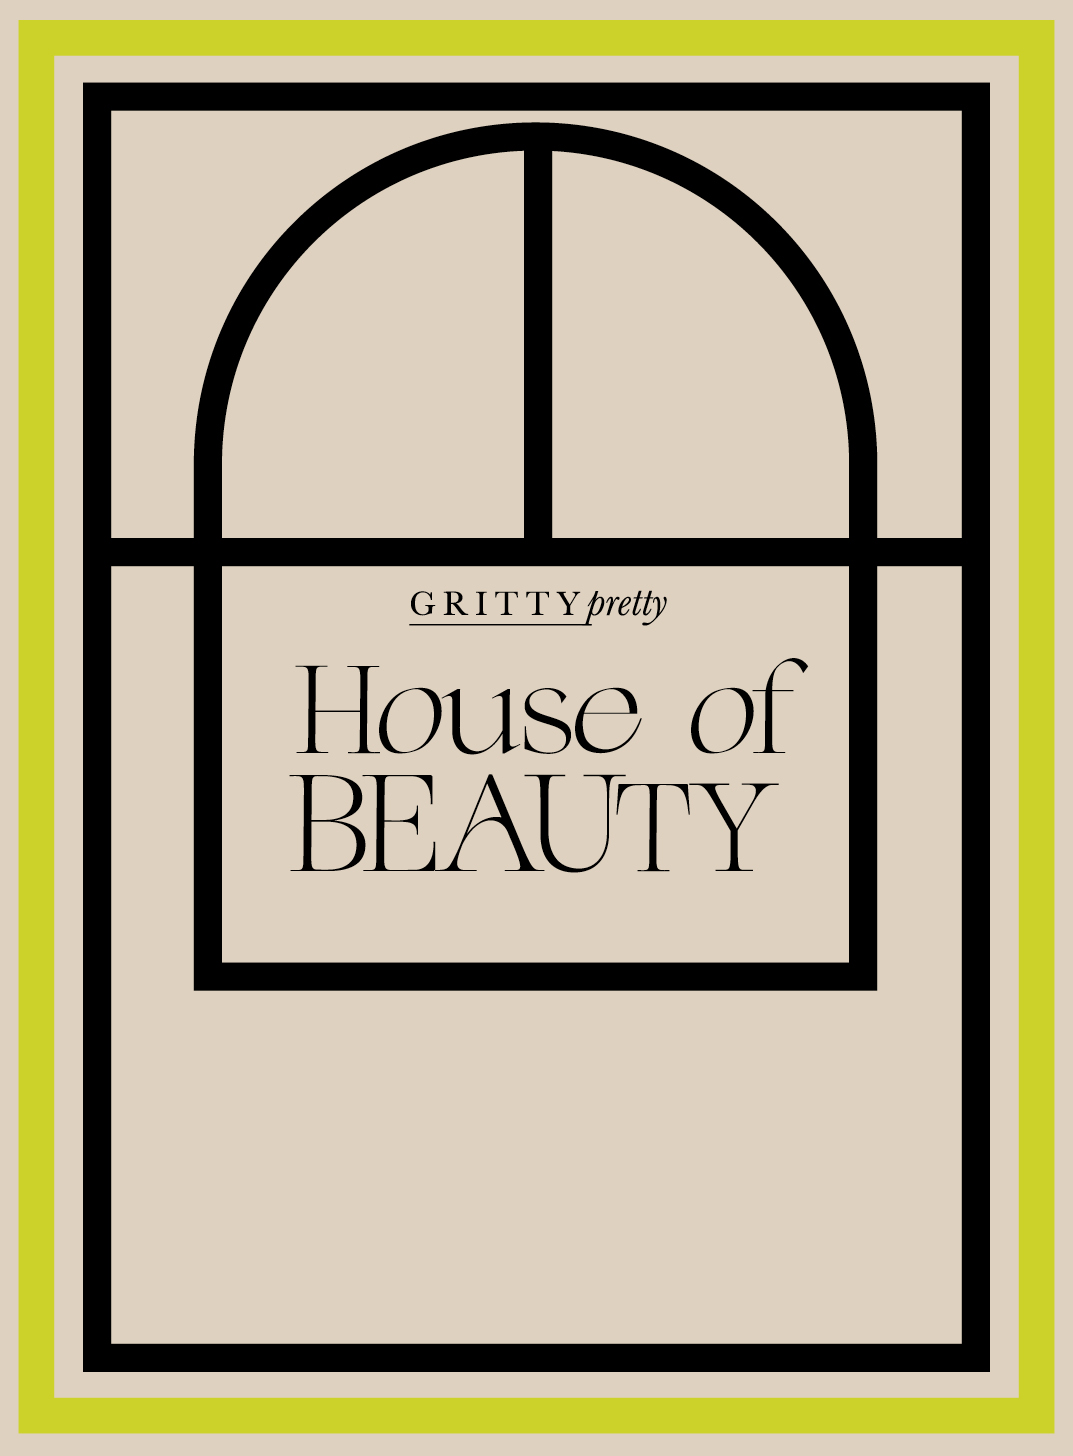 gritty pretty house of beauty